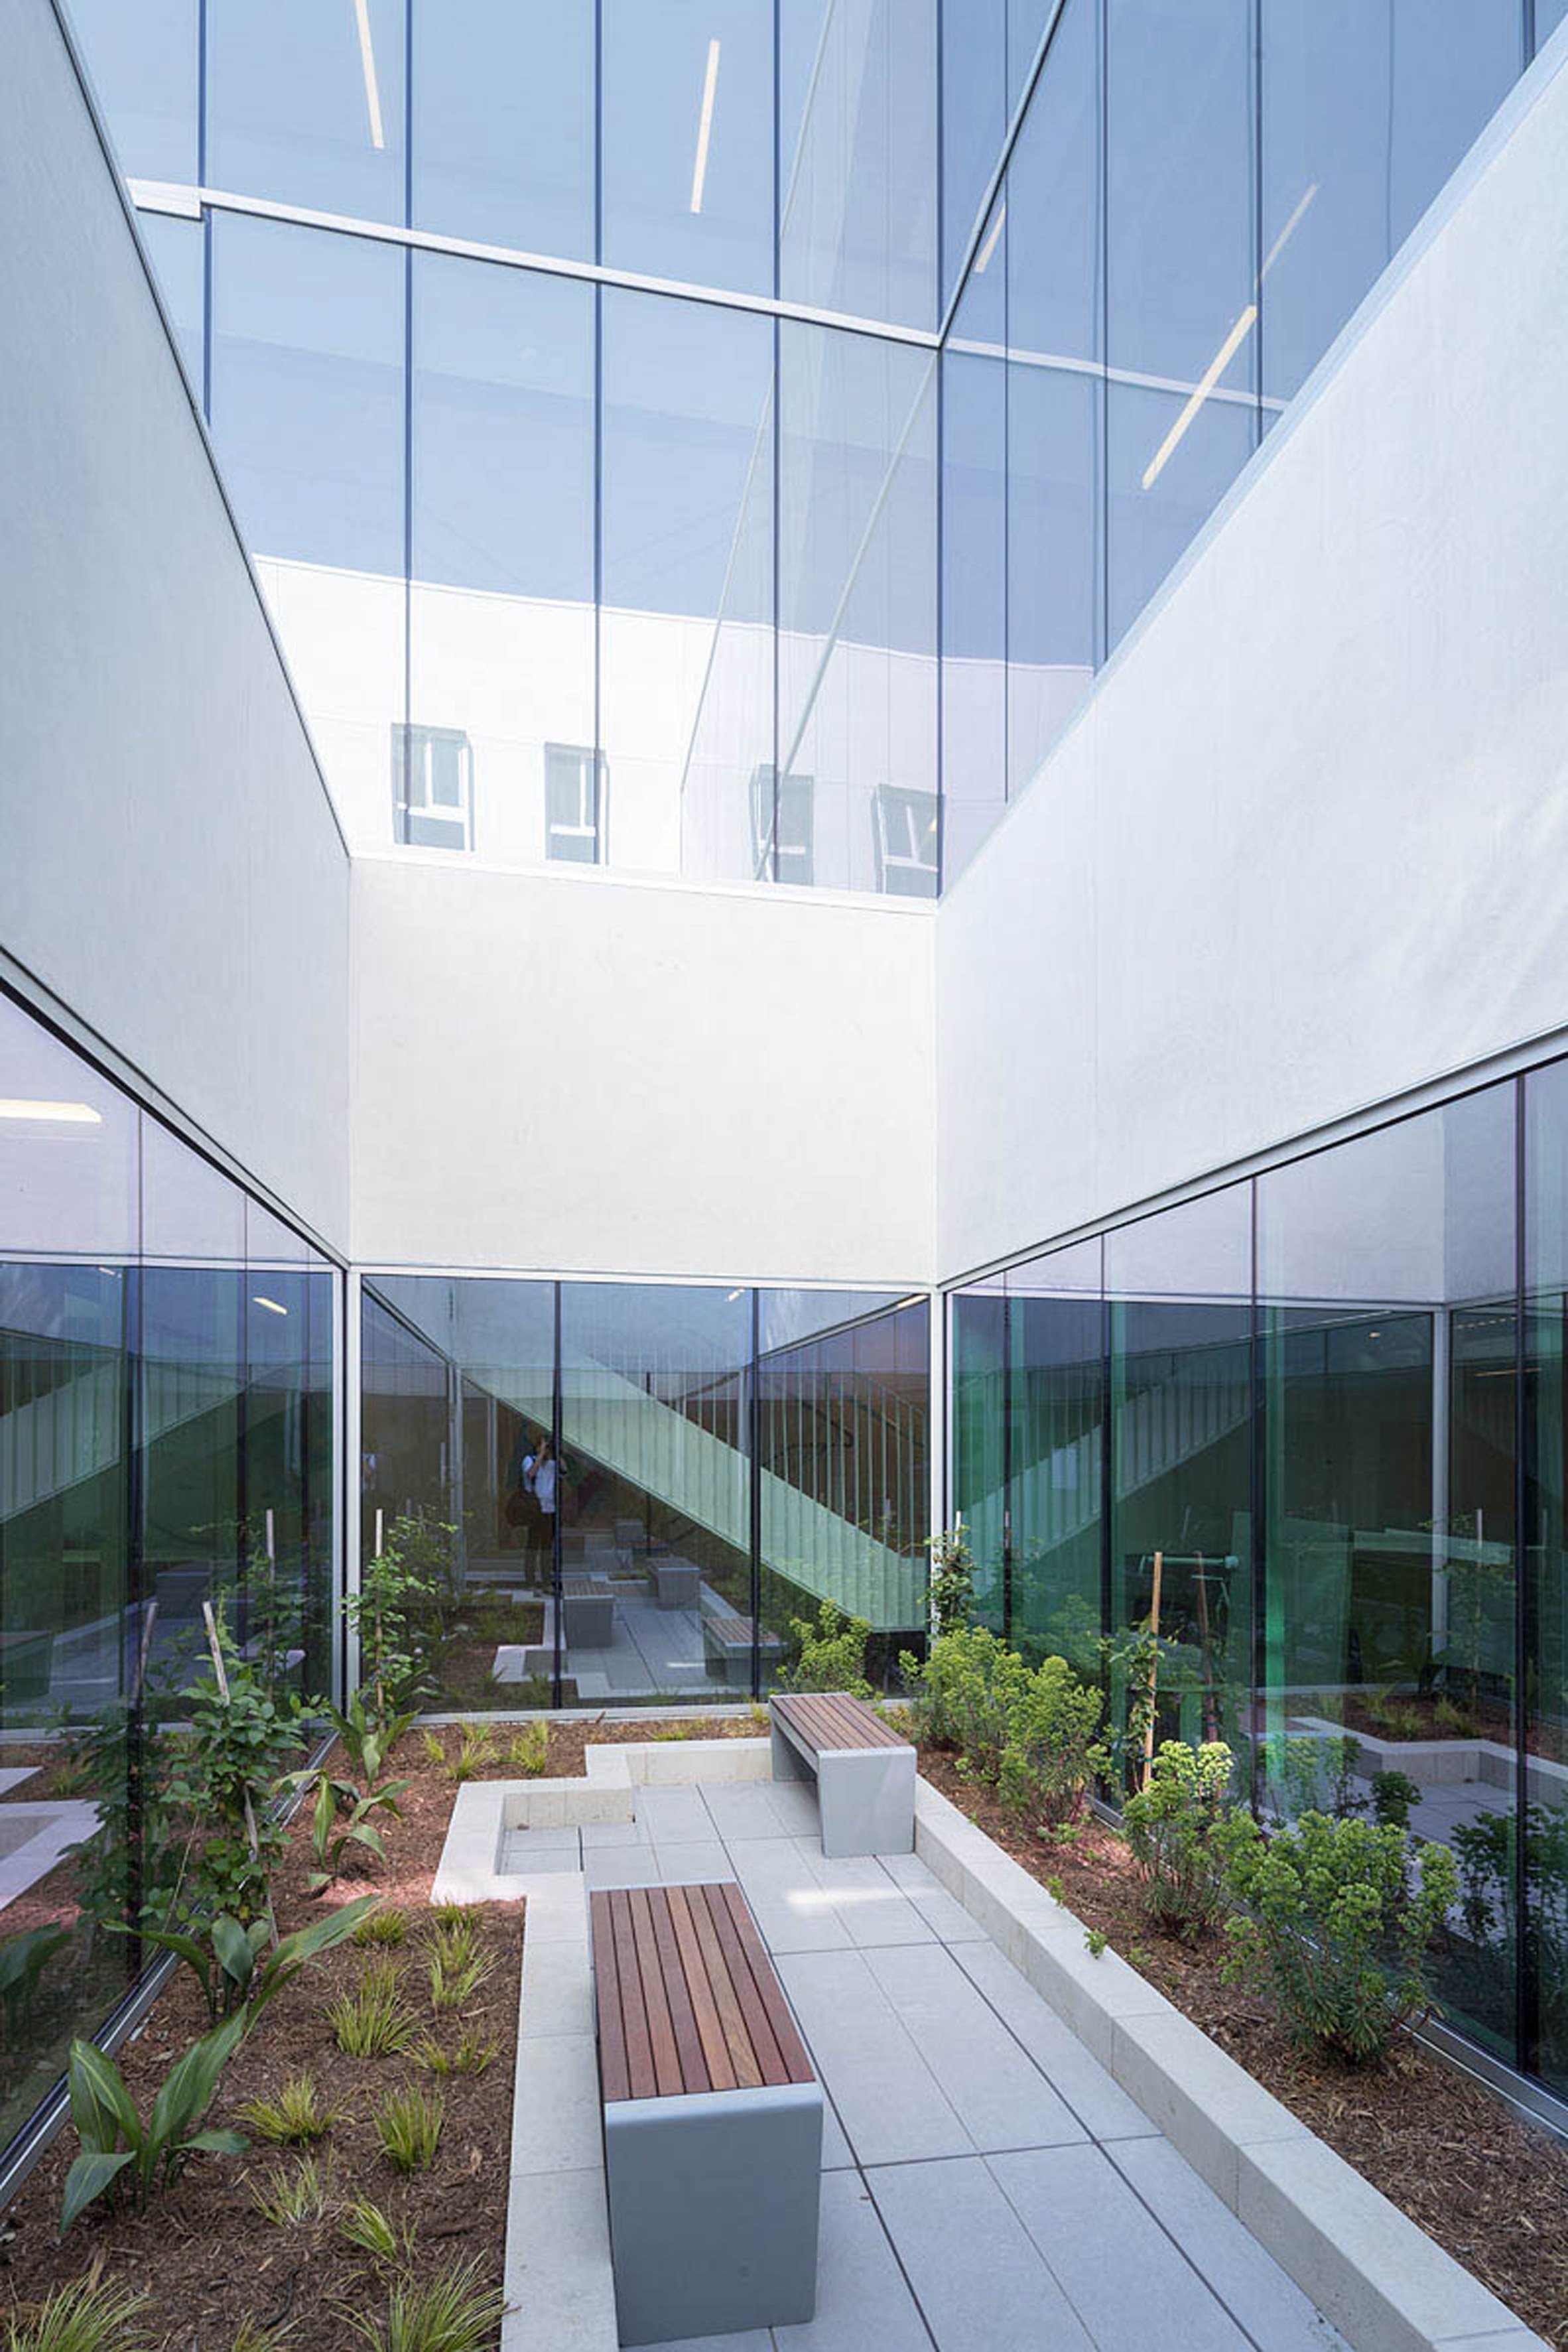 Los Angeles LGBT Center Anita May Rosenstein Campus by Leong Leong and KFA